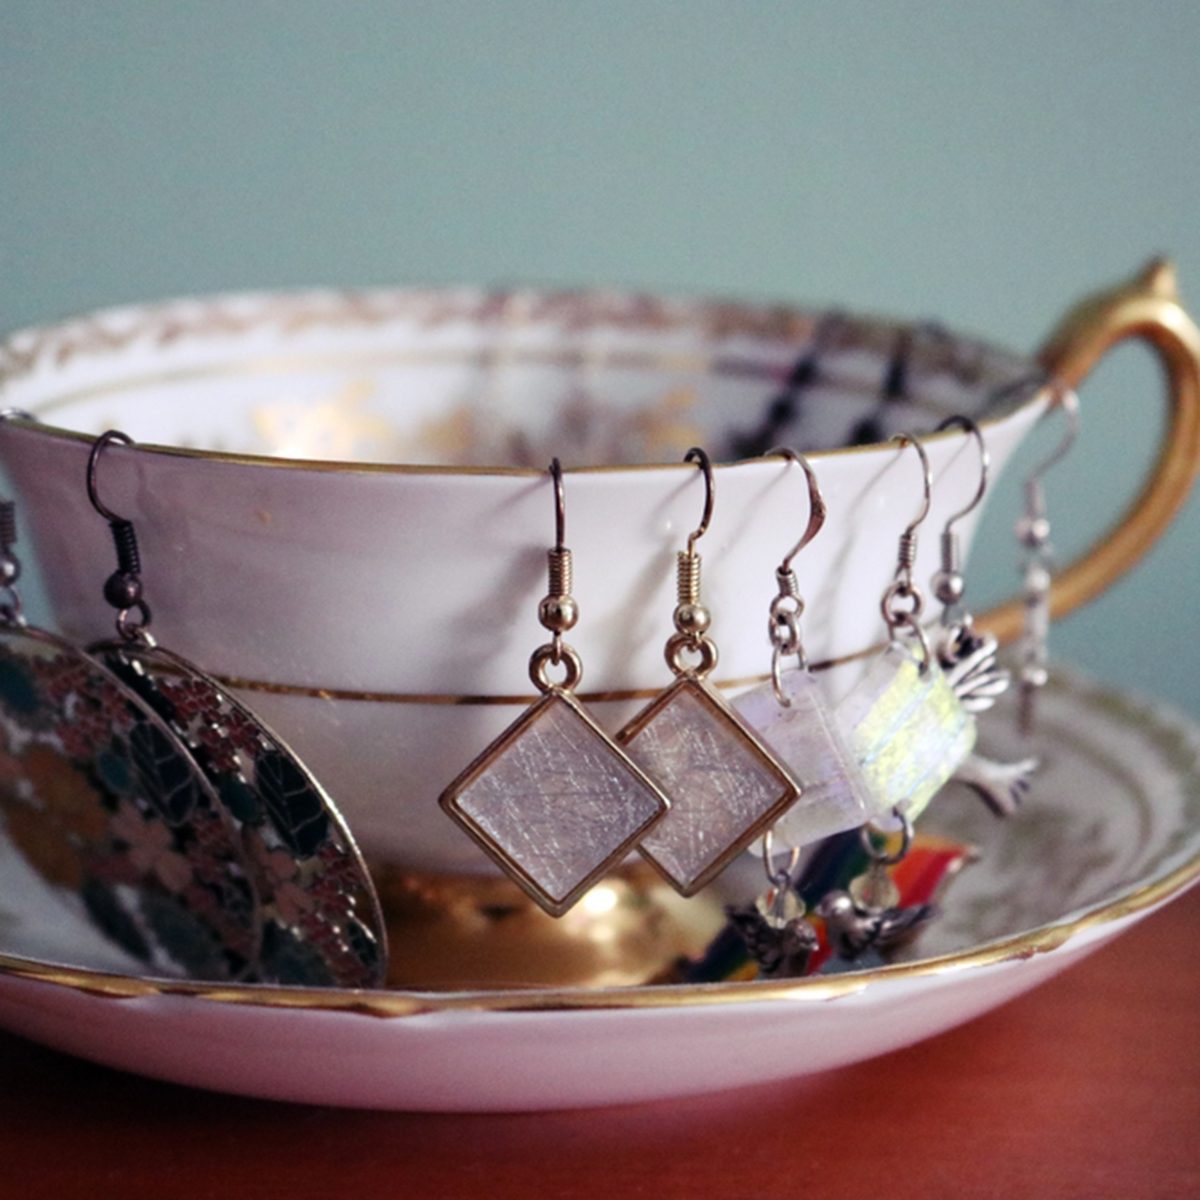 10 Things You Never Thought to Do With Your Vintage Teacups